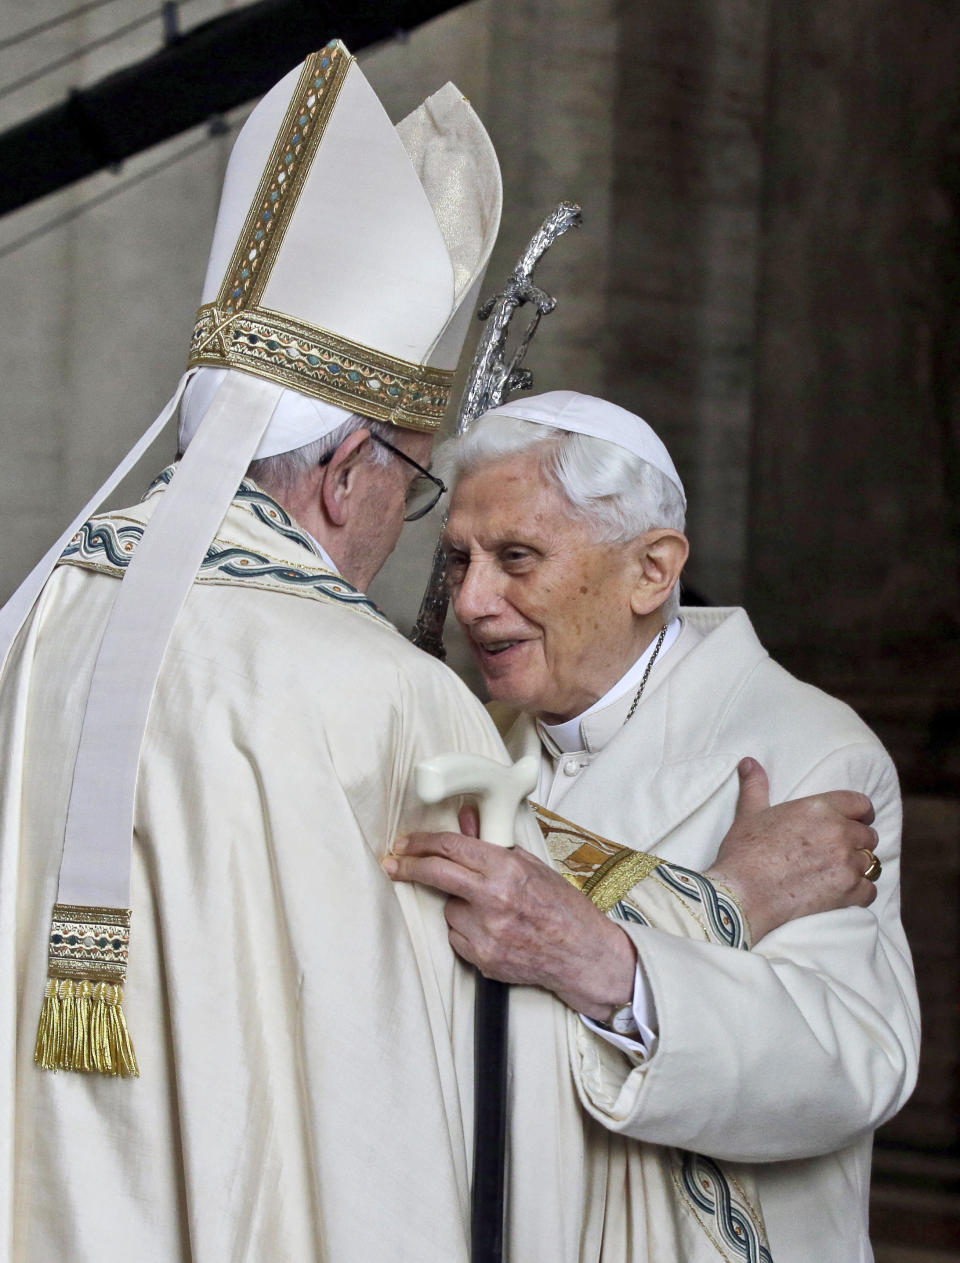 FILE - In this Dec. 8, 2015 file photo, Emeritus Pope Benedict XVI, right, hugs Pope Francis inside St. Peter's Basilica during the ceremony marking the start of the Holy Year, at the Vatican. Emeritus Pope Benedict XVI has marked the eighth anniversary of his historic resignation by insisting in an interview published in Corriere della Sera Monday, March 1, 2021, that he stepped down knowingly and that “there is only one pope” _ Francis. (AP Photo/Gregorio Borgia, file)